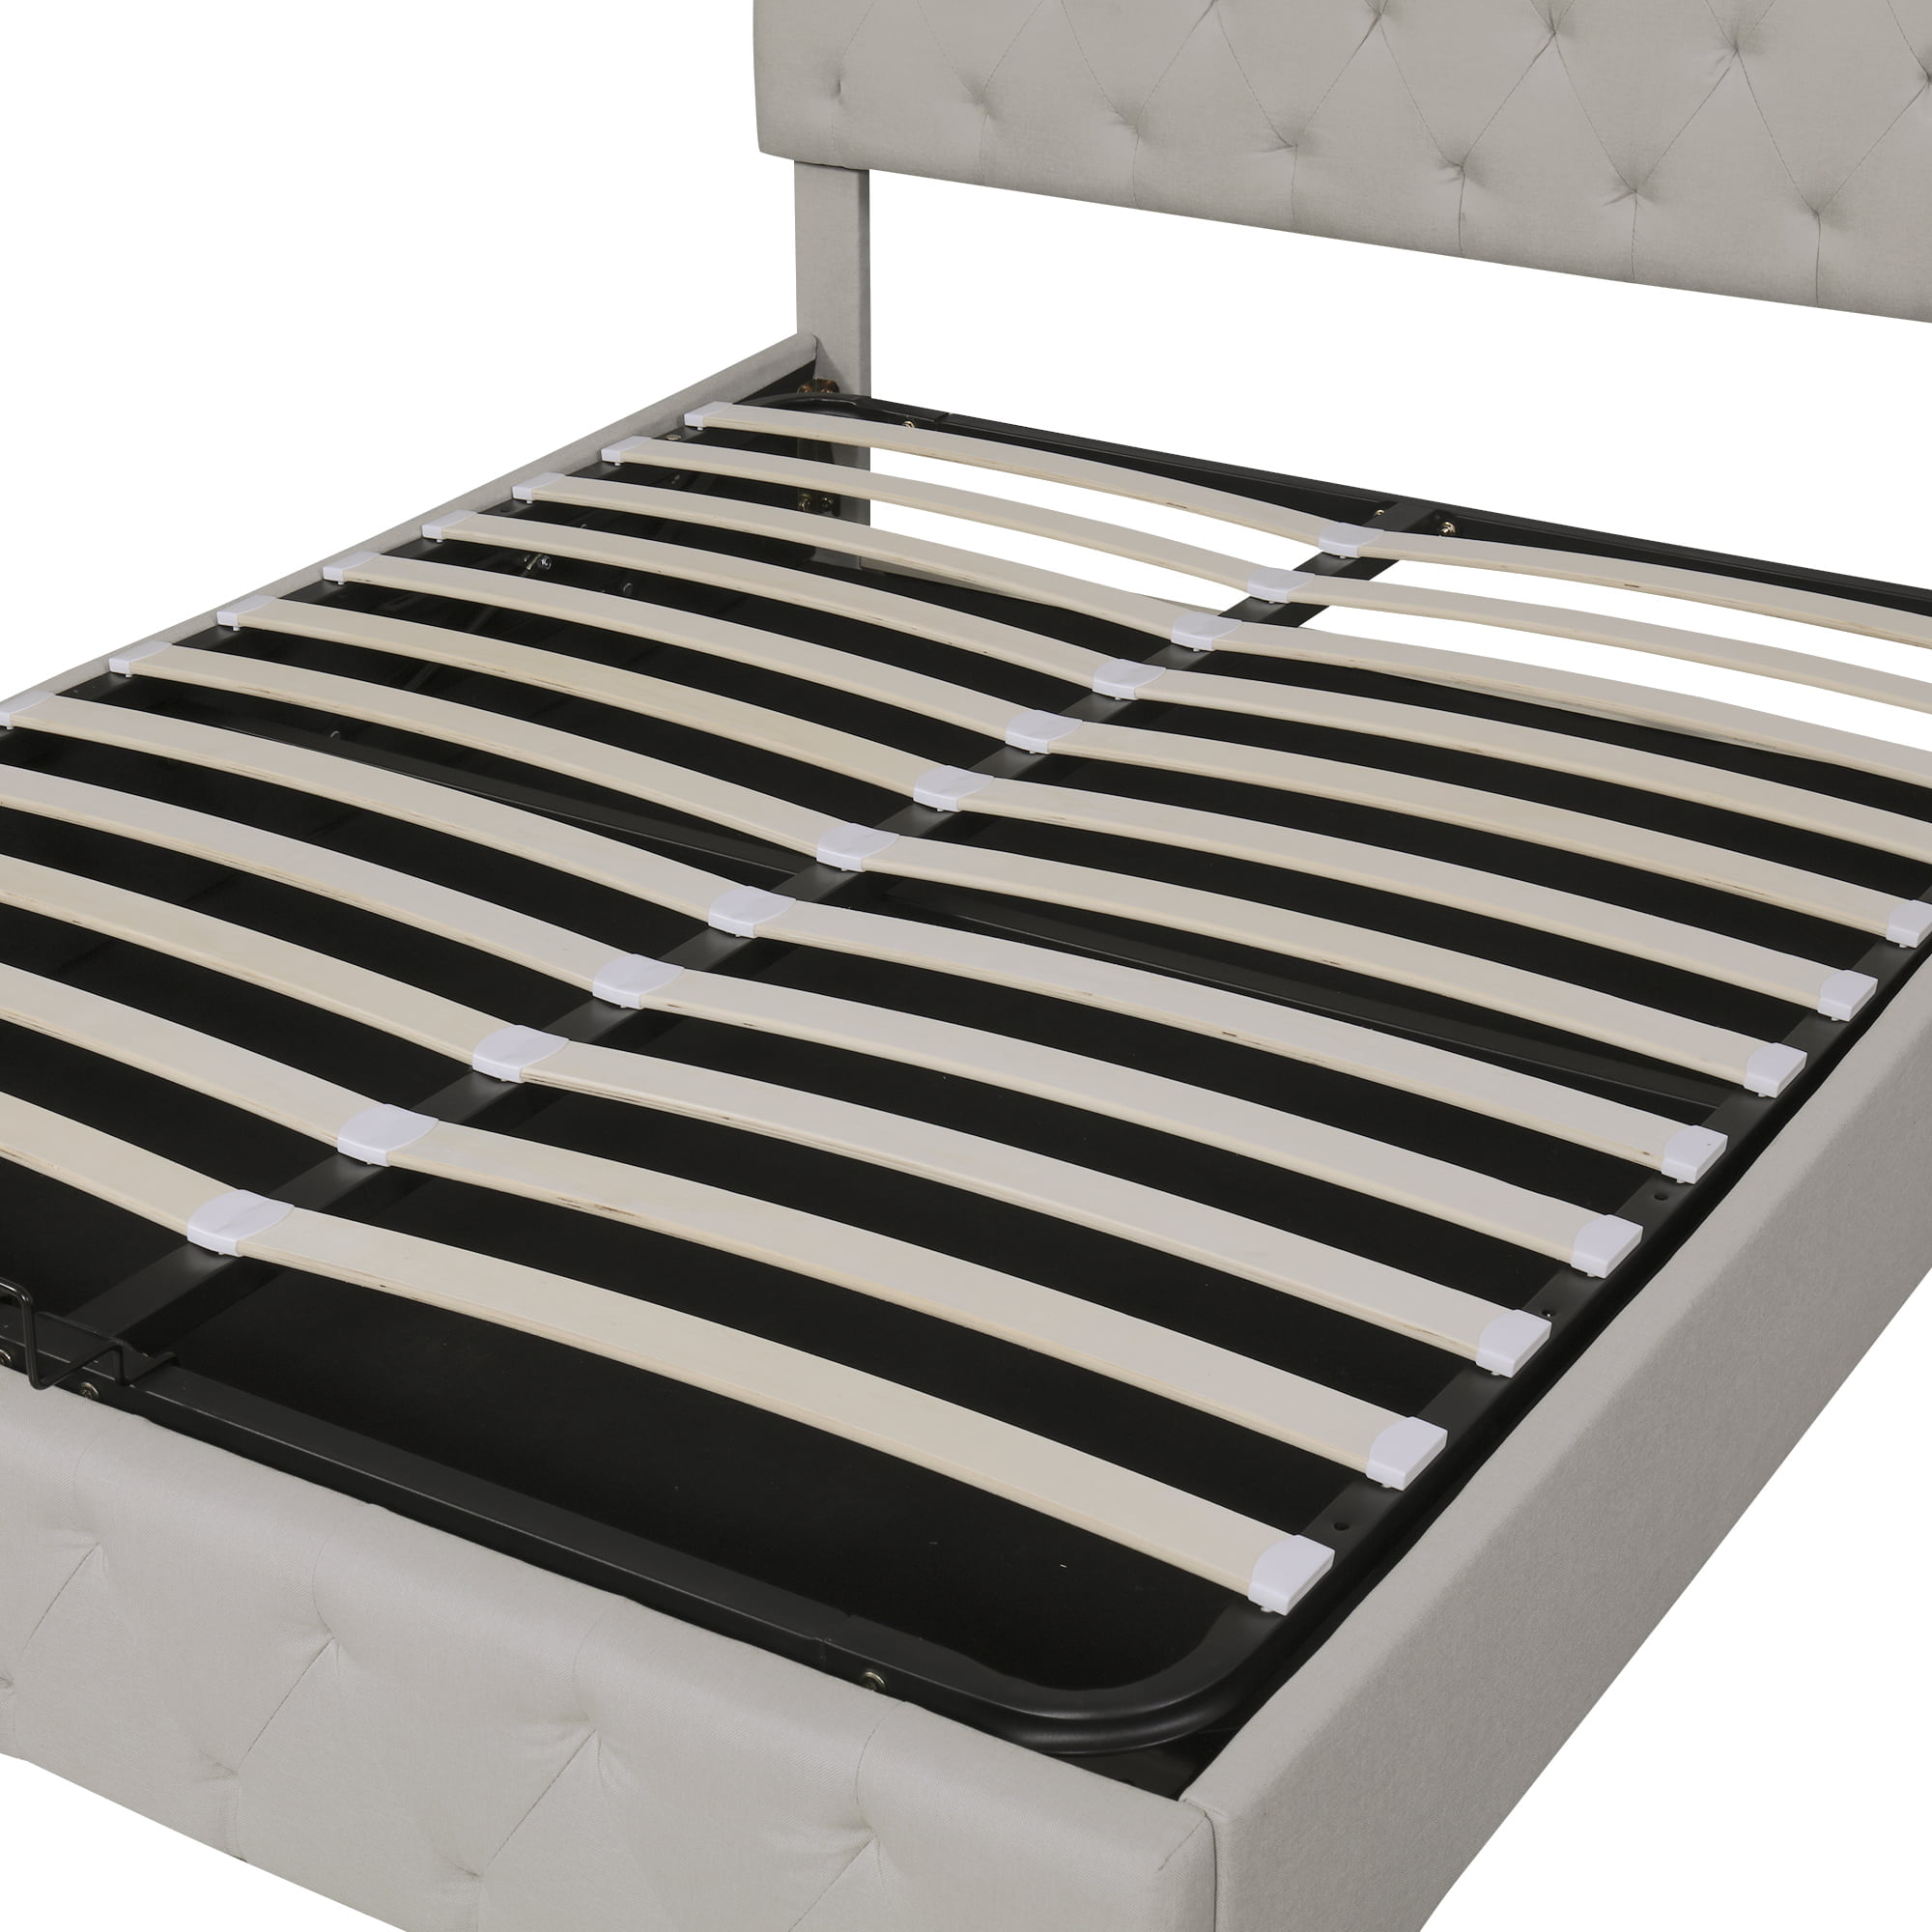 Queen Size Storage Upholstered Platform Bed - GX001913AAA